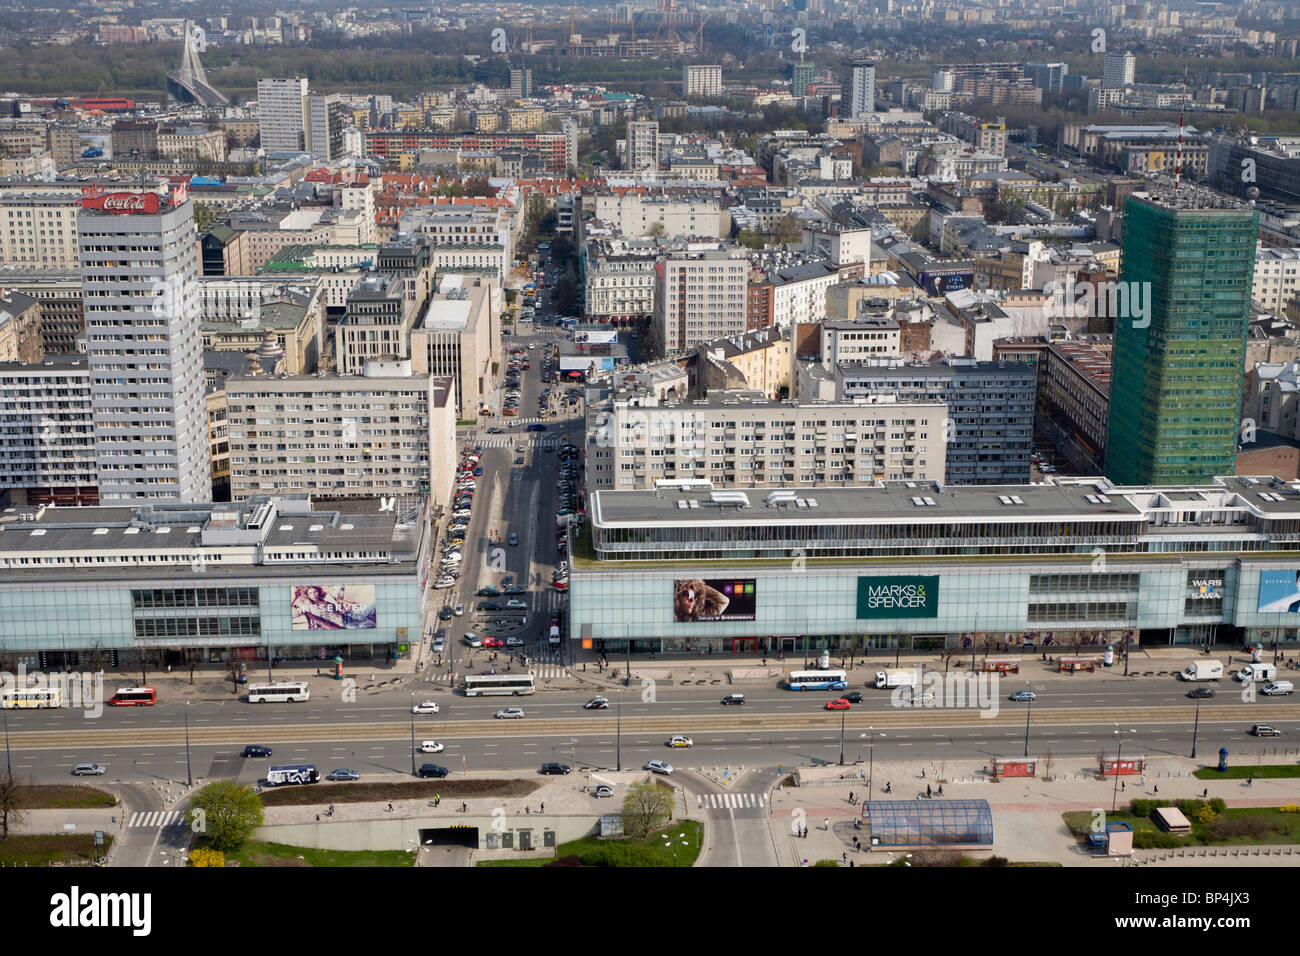 Marszalkowska street. The view is from the Palace of Culture and Science, Warsaw Poland. Stock Photo